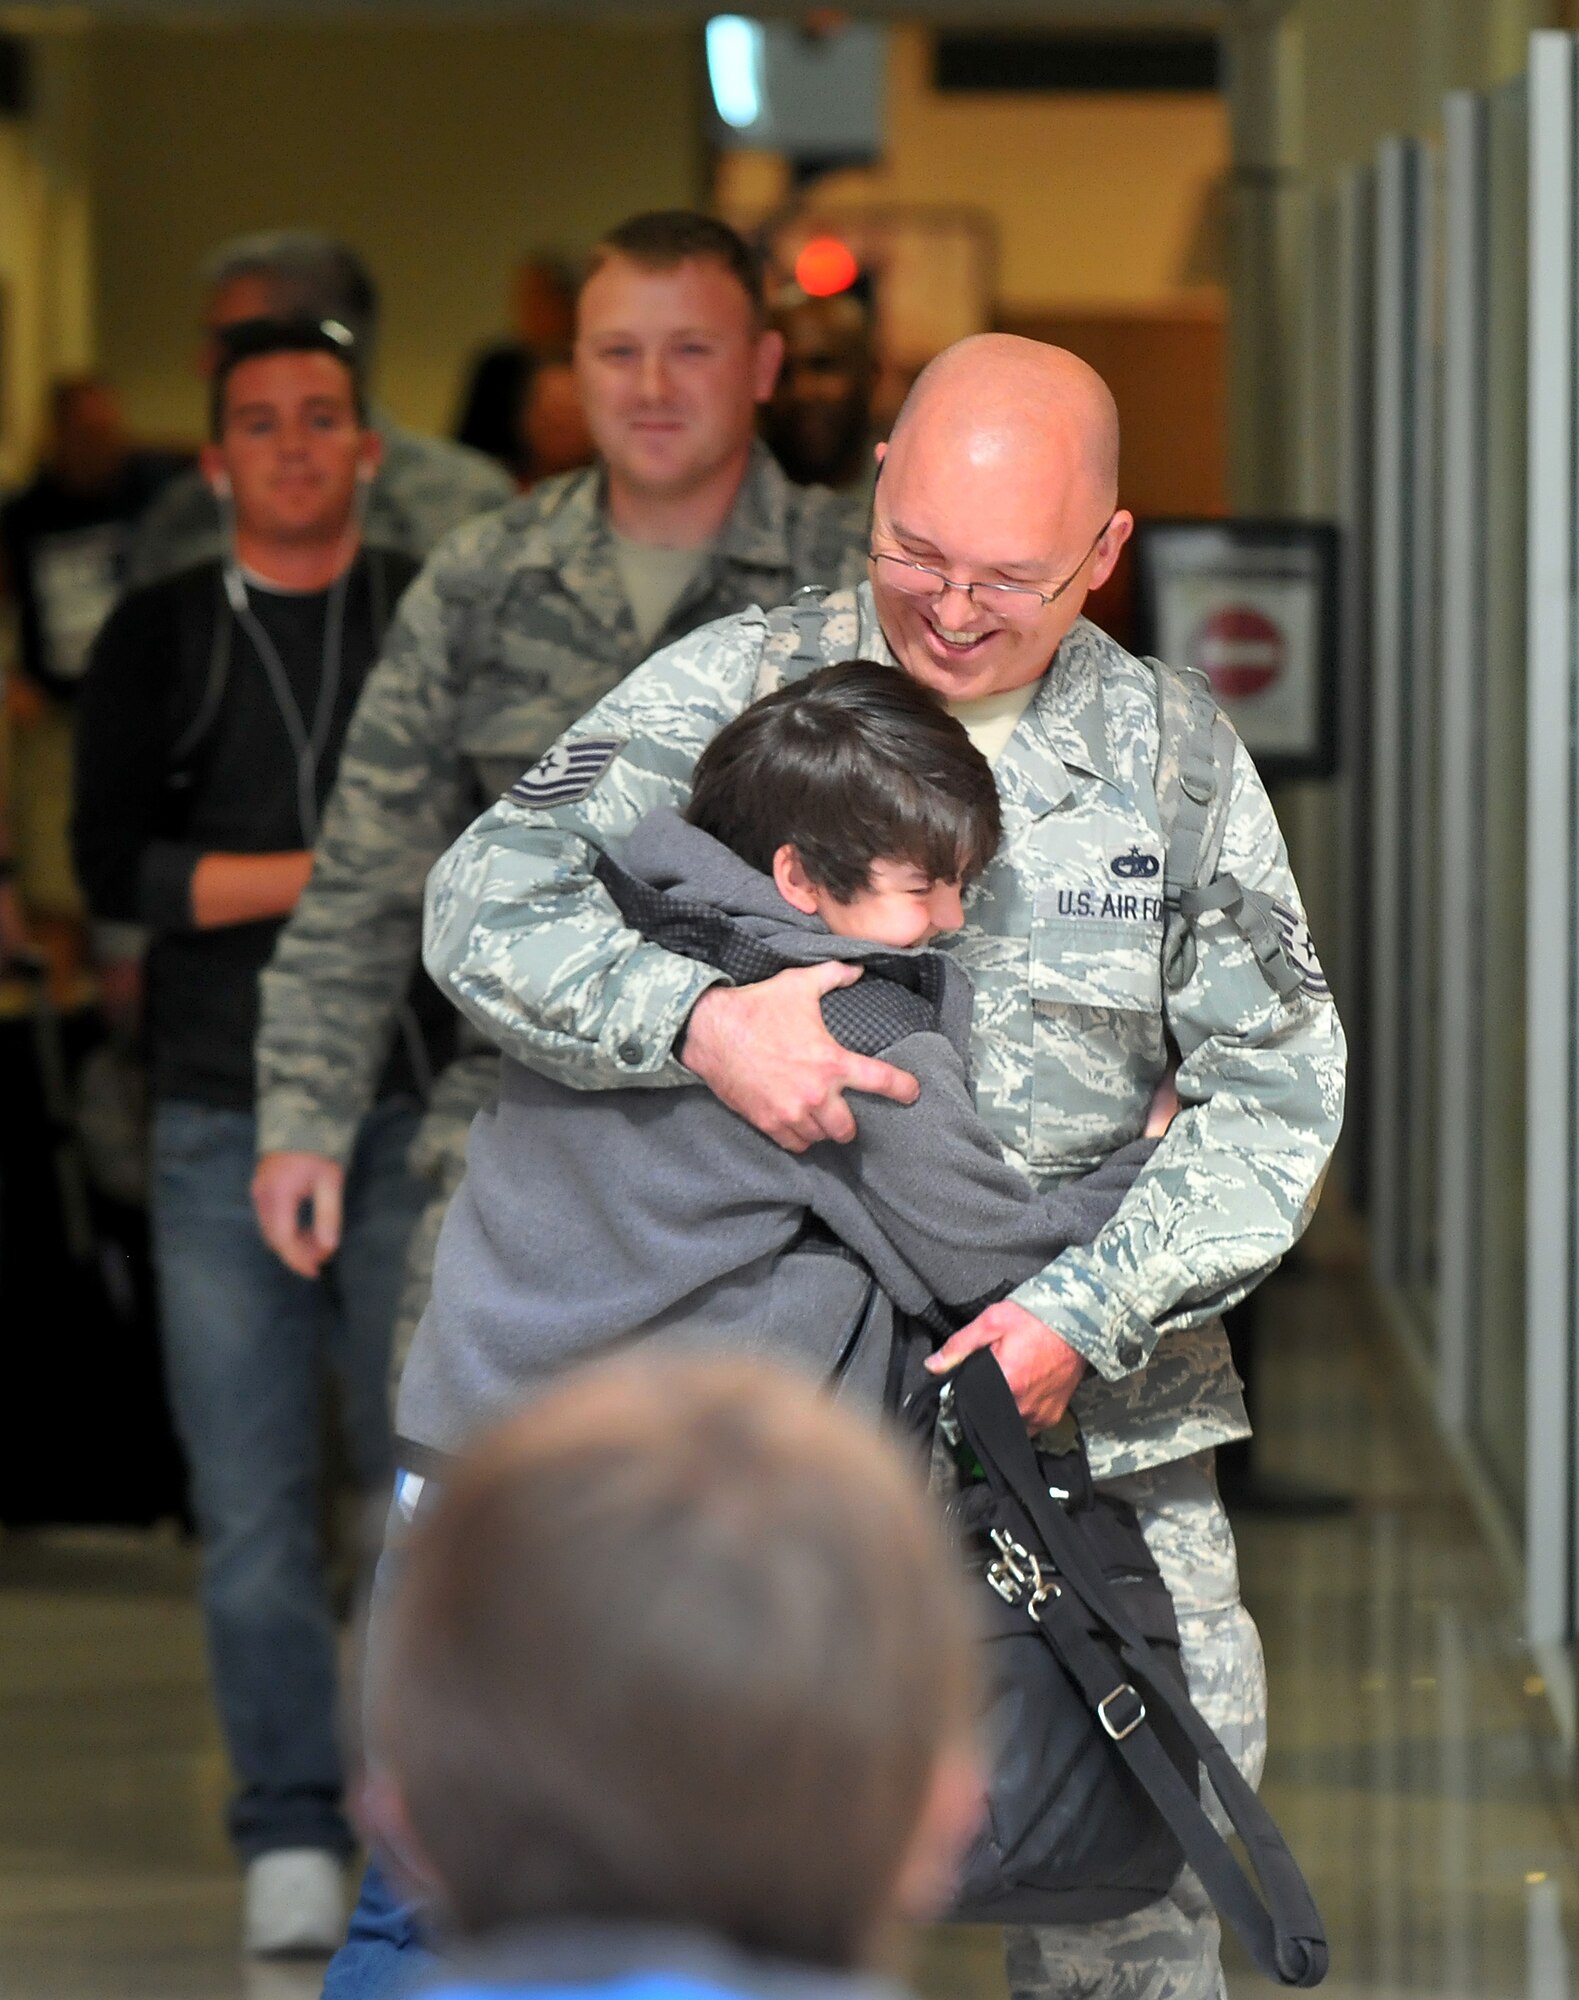 Tech. Sgt. David Kalb, 87 Aerial Port Squadron, is greeted by his son, Lucas, at Dayton International Airport upon his return home from his deployment in May. Kalb and three 87 APS Airmen were returning home from their deployment to the Transit Center, Manas, Kyrgyzstan (Air Force photo by Tech. Sgt. Frank Oliver).

